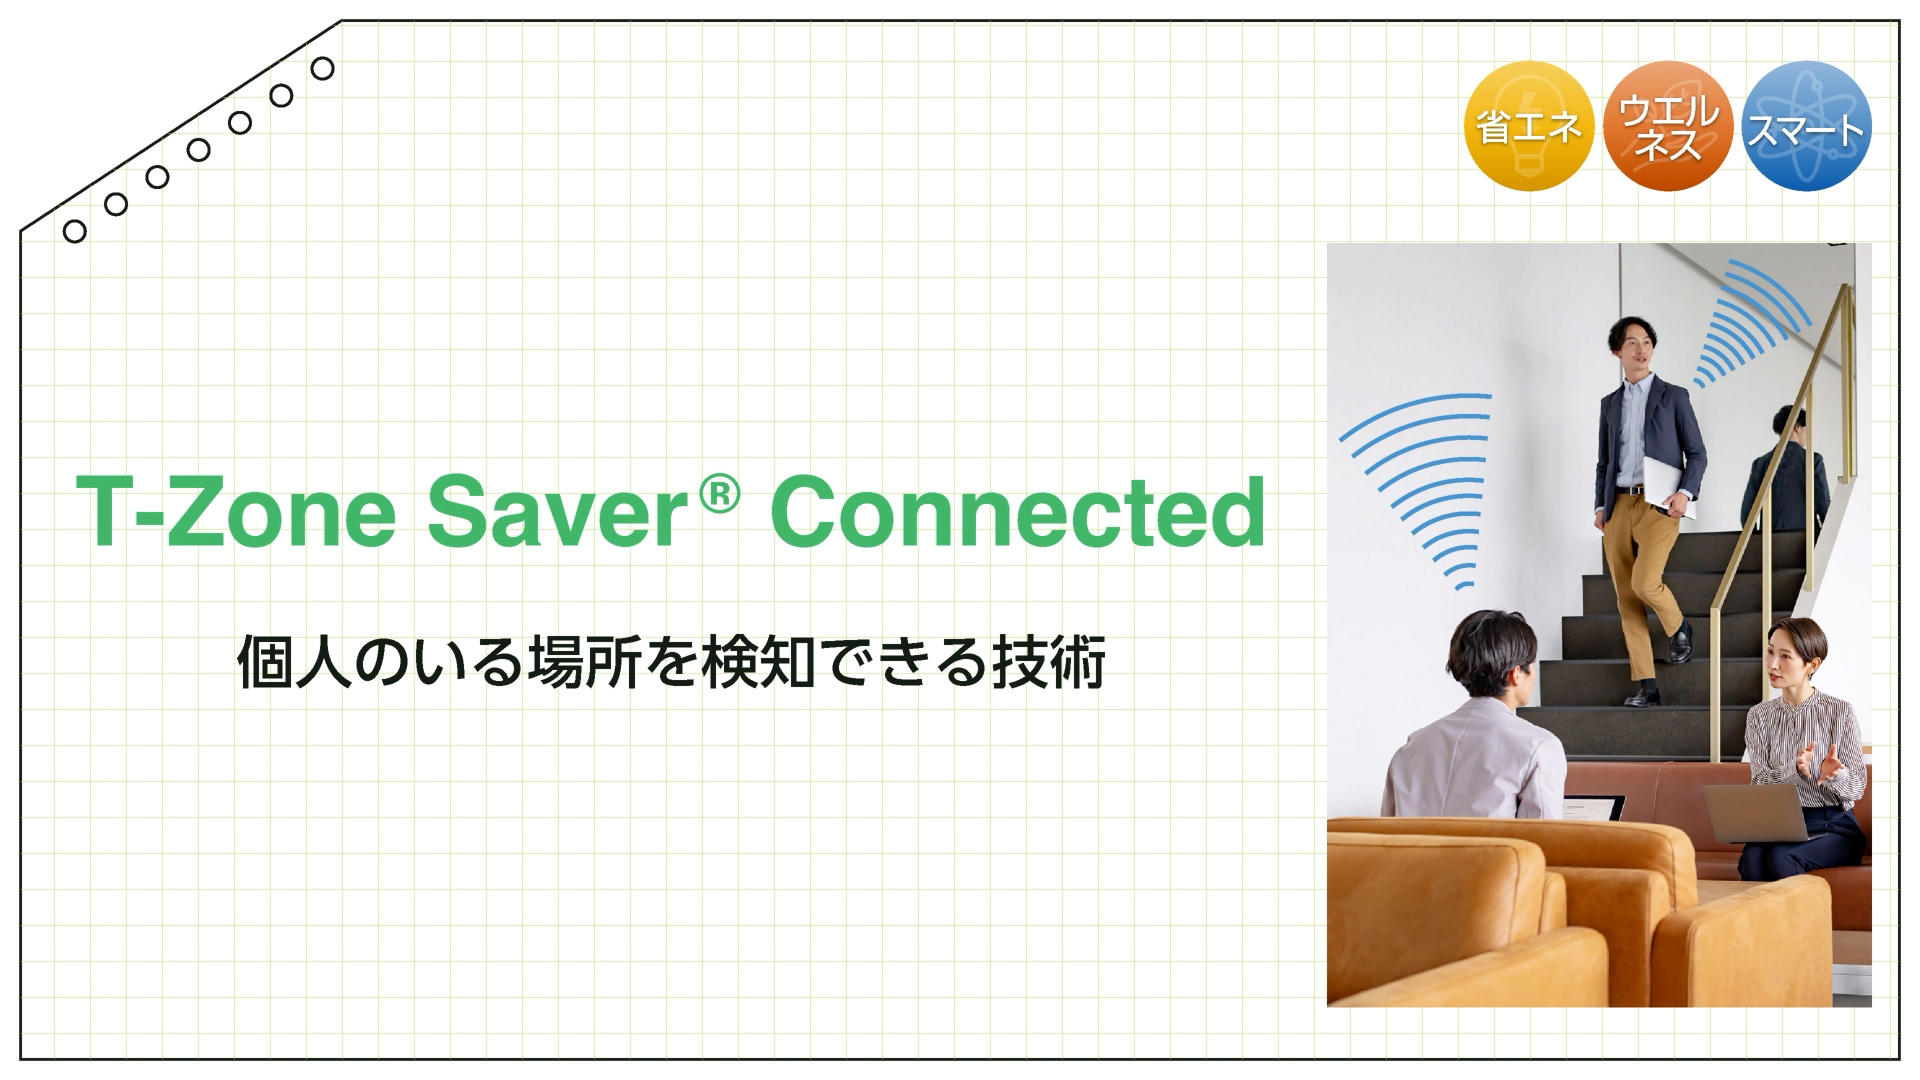 T-Zone Saver Connected